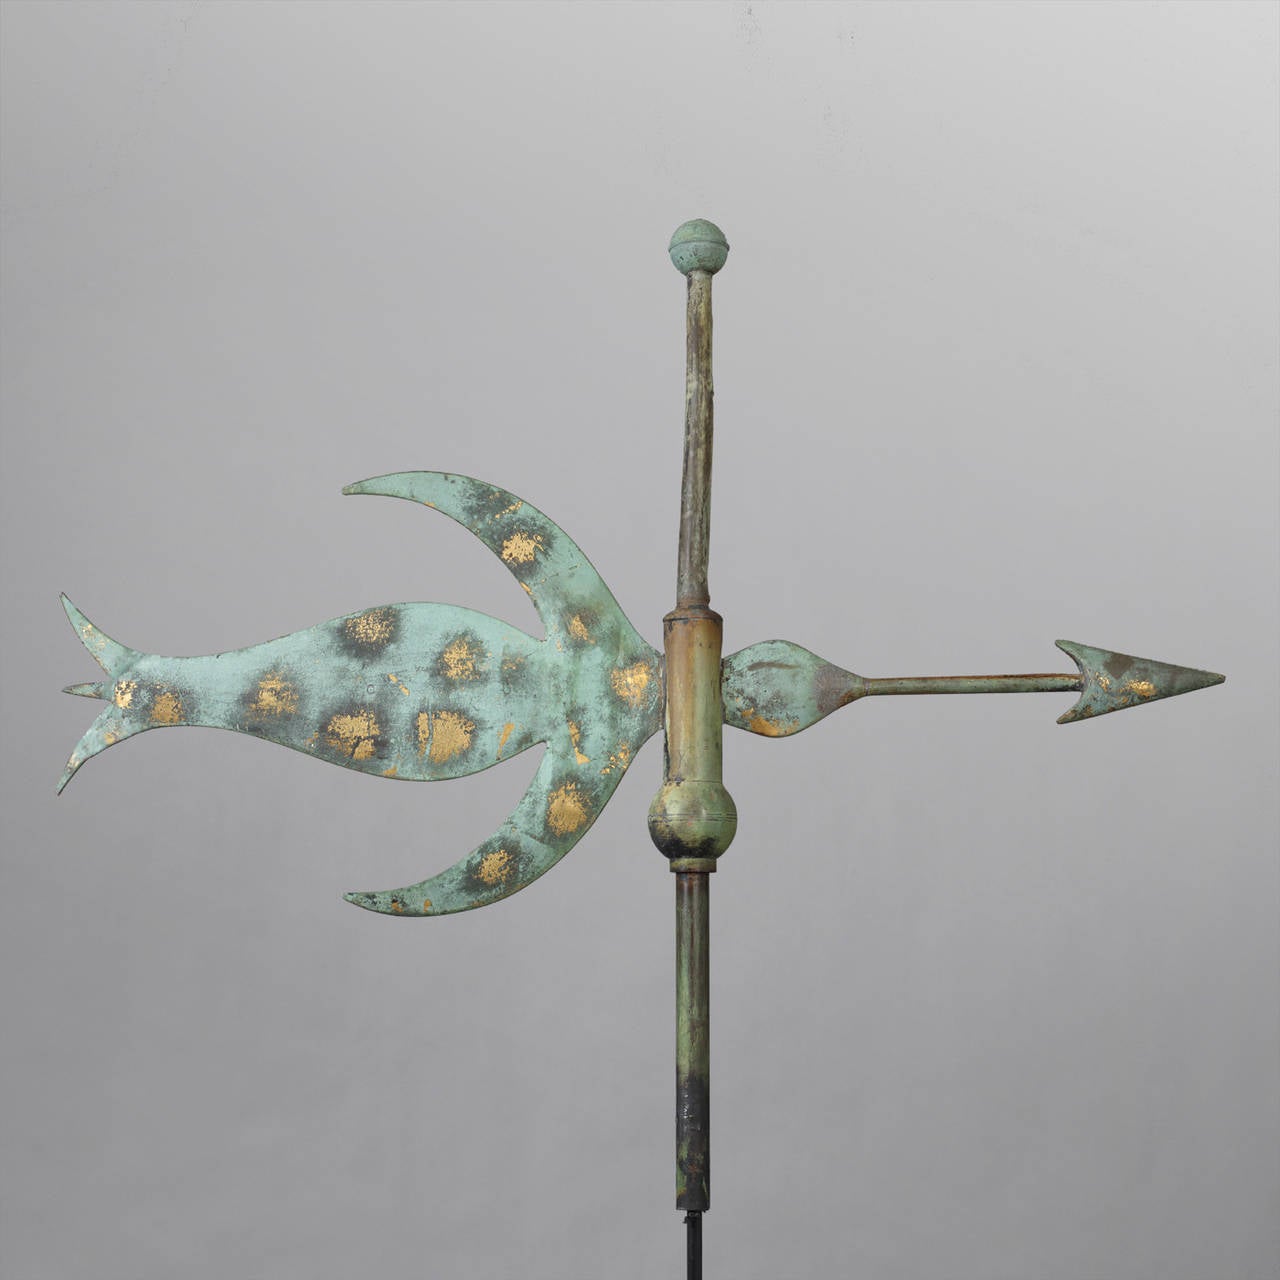 American, ca. 1865-1875.
Copper, copper tubing, iron
Condition: Excellent condition with a wonderful verdigris surface and traces of the original gold leafing.
Provenance: Private Collection, CT. Purchased in the early 1960's.

This unusual and